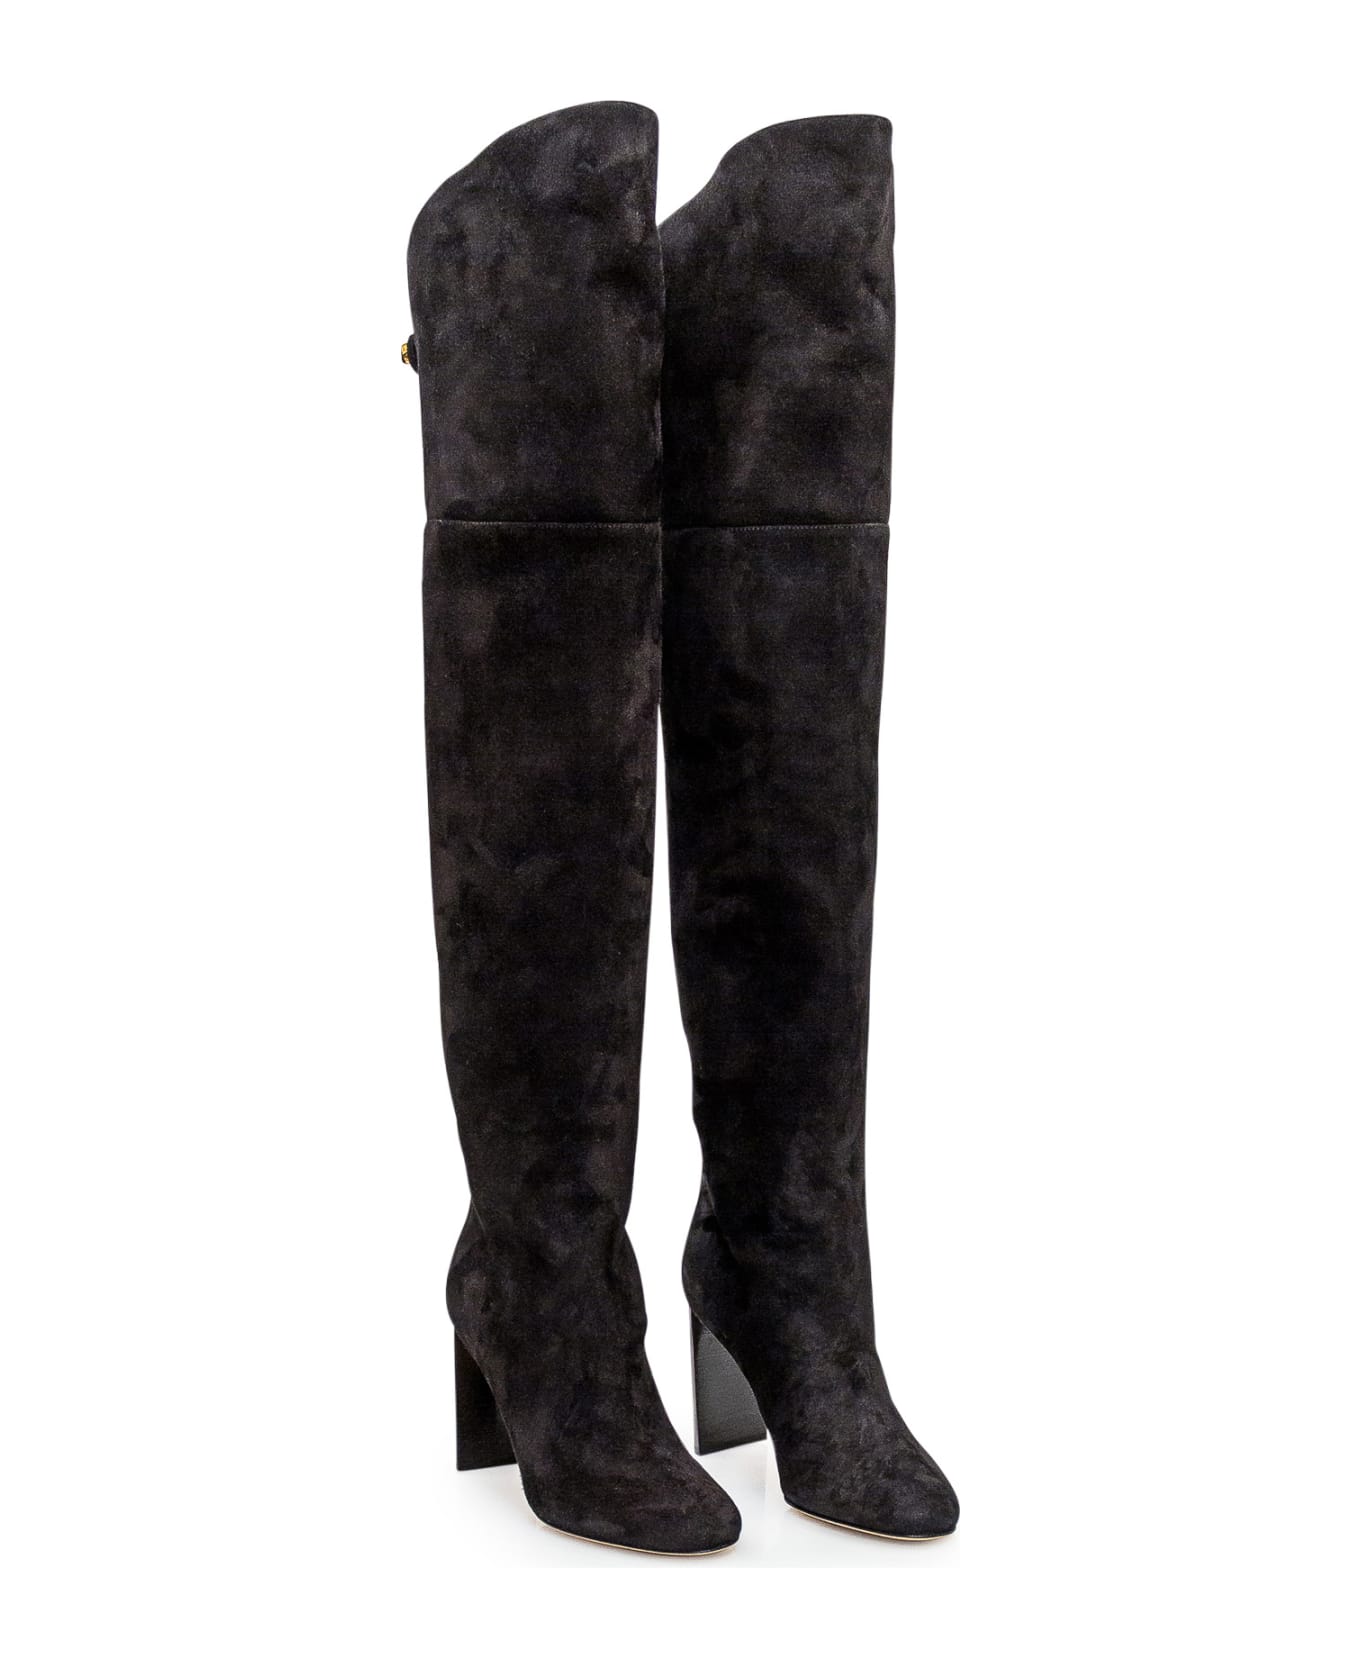 Maison Skorpios Marylin Suede Leather Boots - BLACK ブーツ